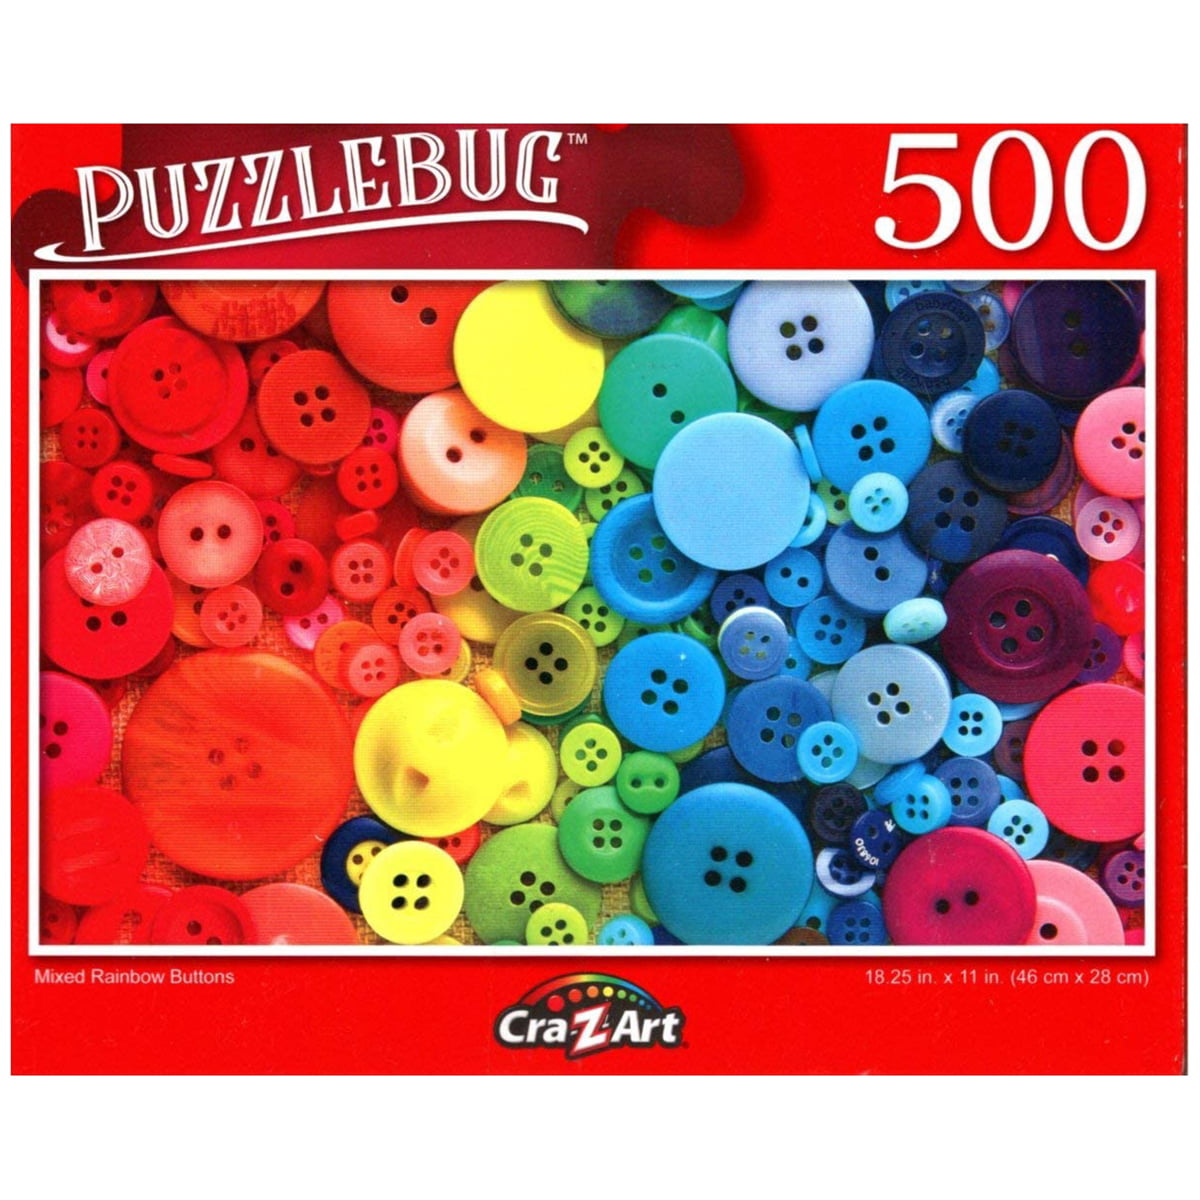 NEW PUZZLEBUG 500 Puzzle S/3 Windows; Row of Kayaks; Lobster Shack new England 